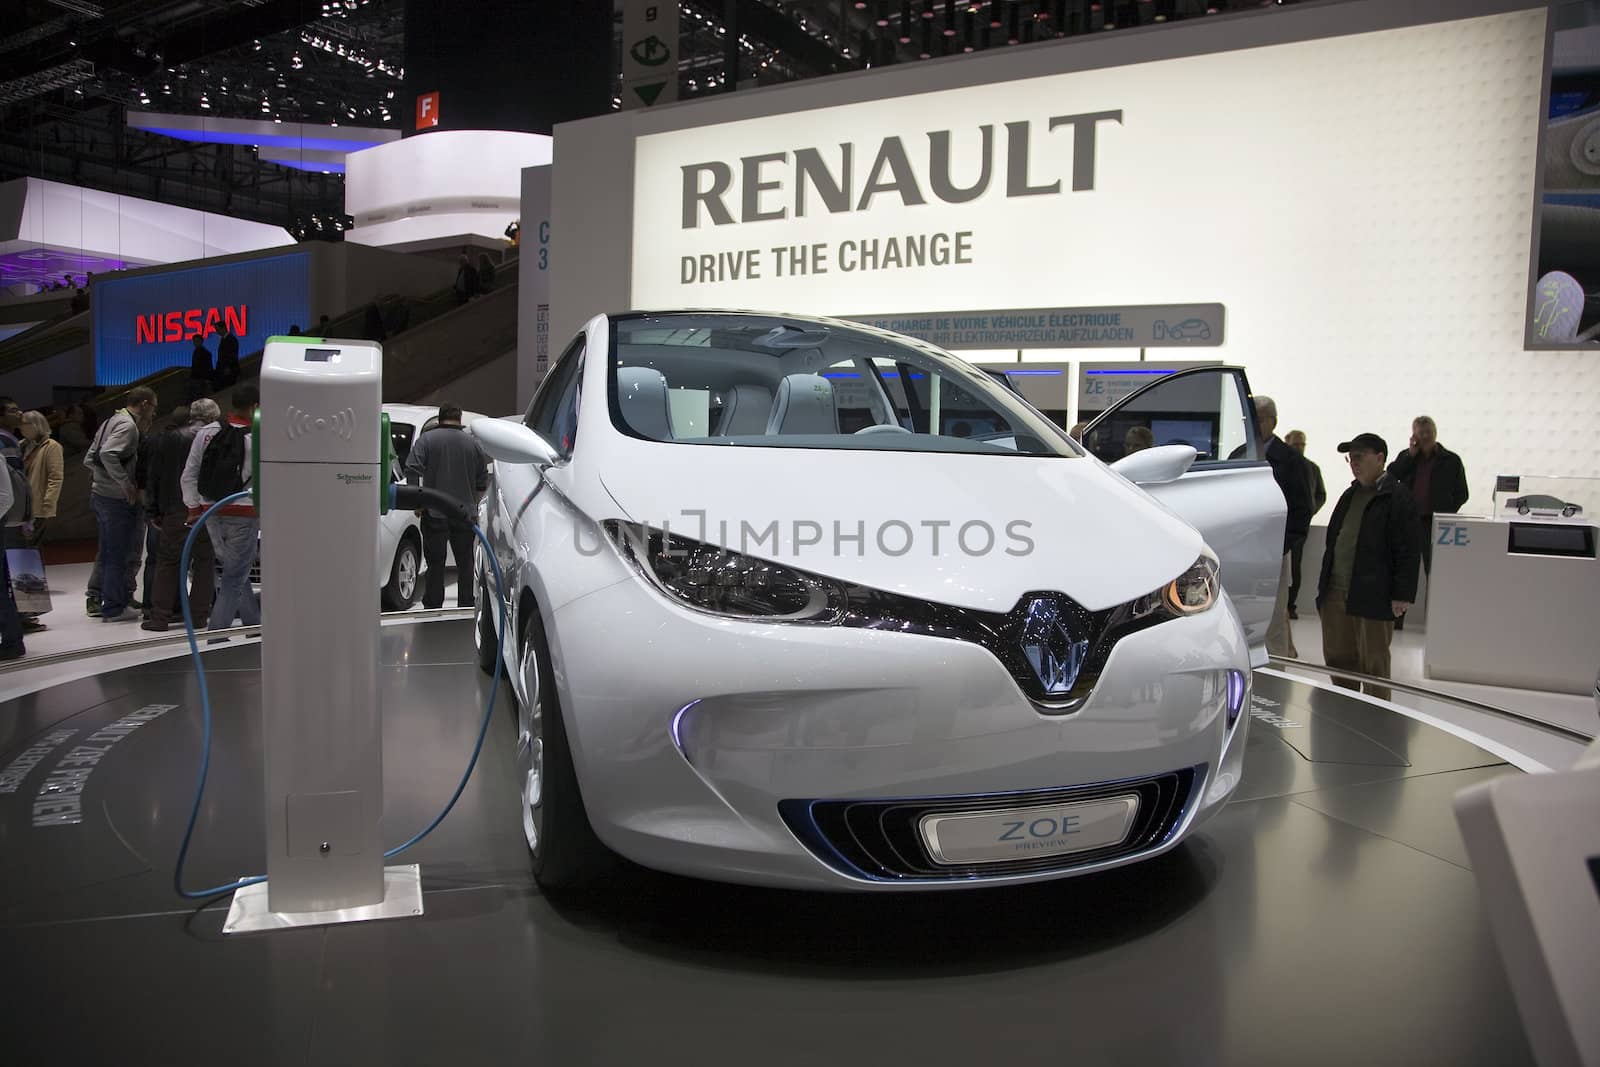 GENEVA, SWITZERLAND - MARCH 4, 2011 - Renault Zoe Preview Car is presented at the annual motor show in Geneva on March 4, 2011.